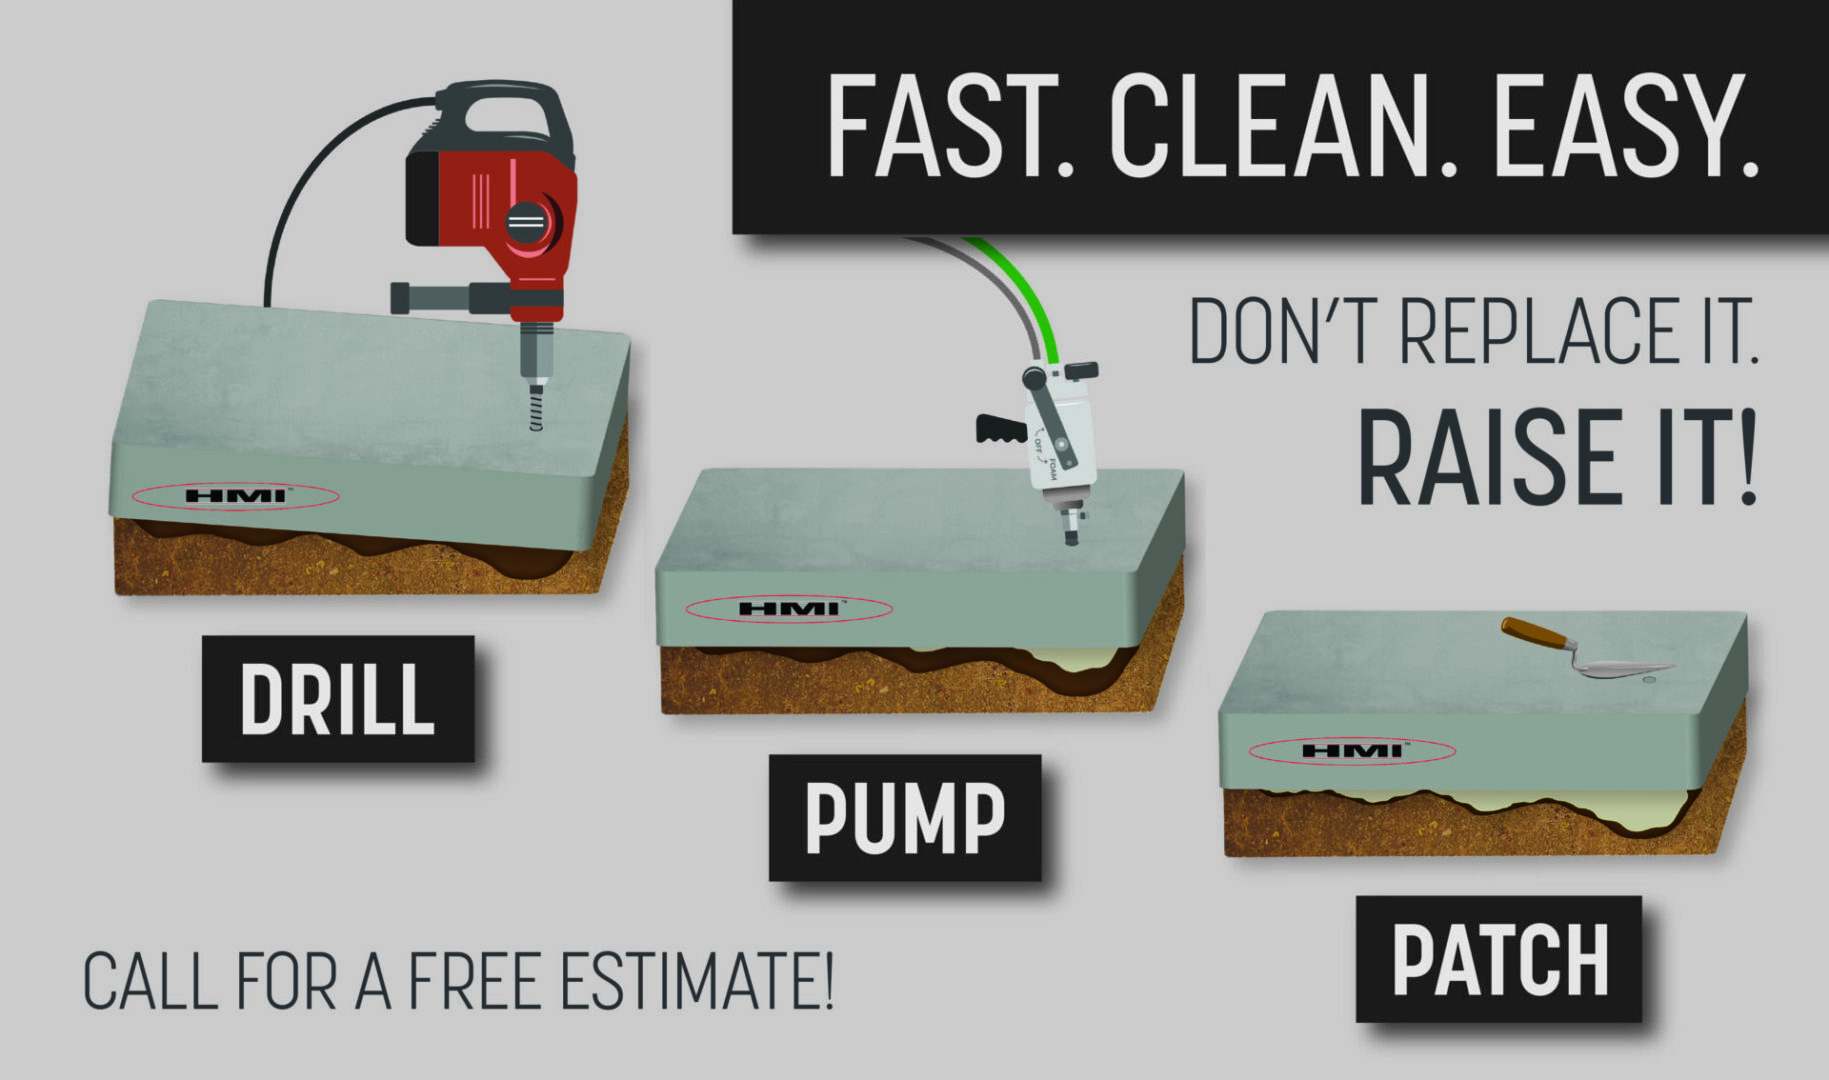 A graphic showing how to use a drill and pump.